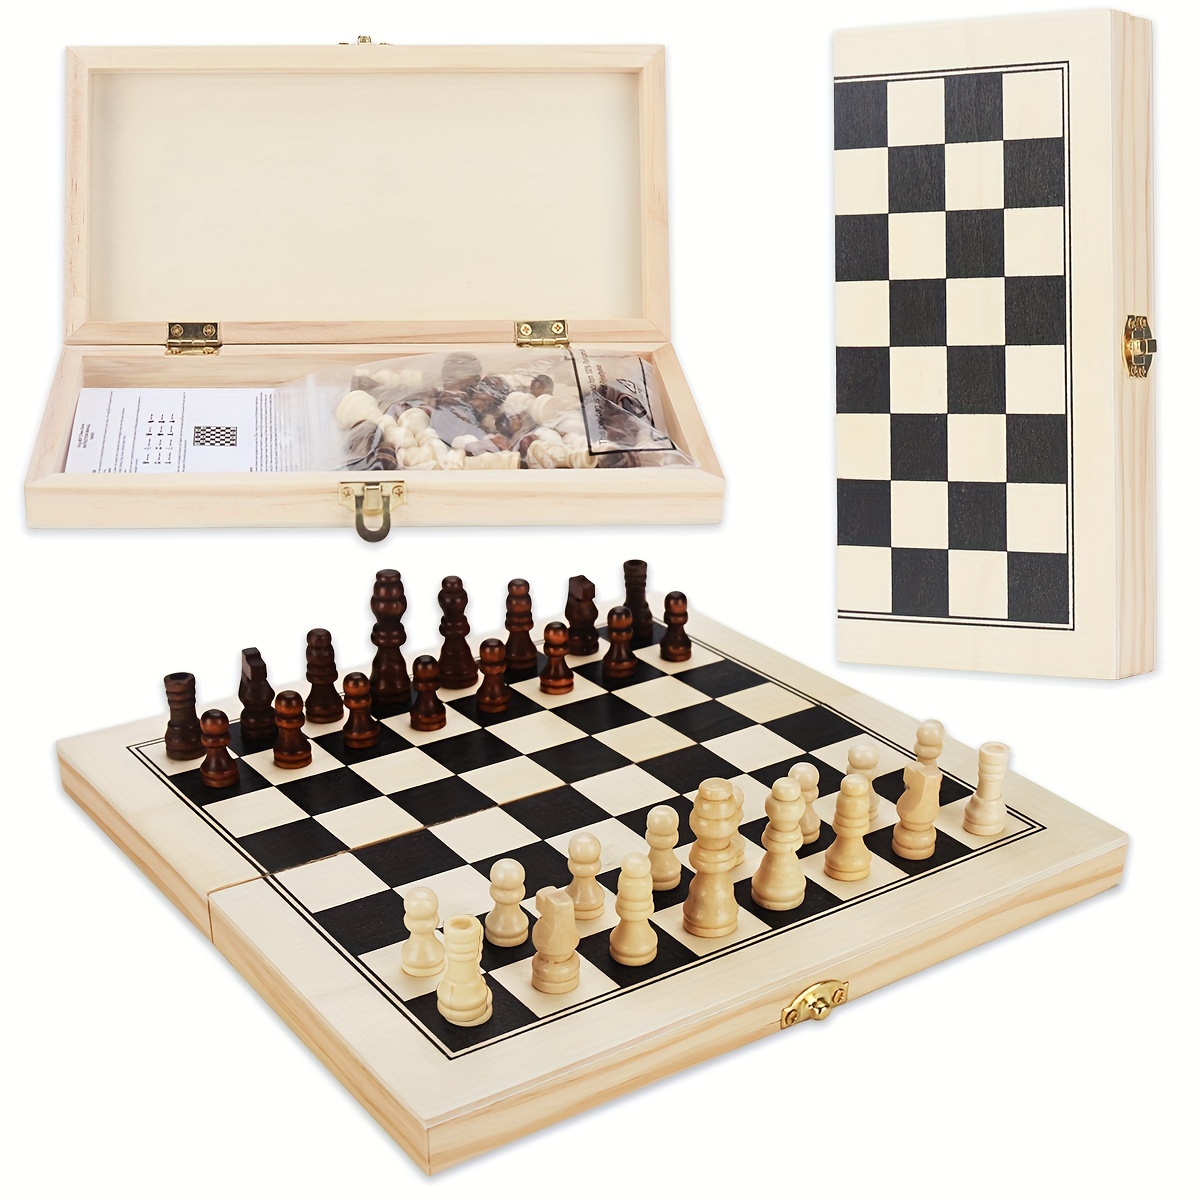 Dropship Folding Board Game Set Portable Travel Wooden Chess Set With  Wooden Crafted Pieces Chessmen Storage Box to Sell Online at a Lower Price